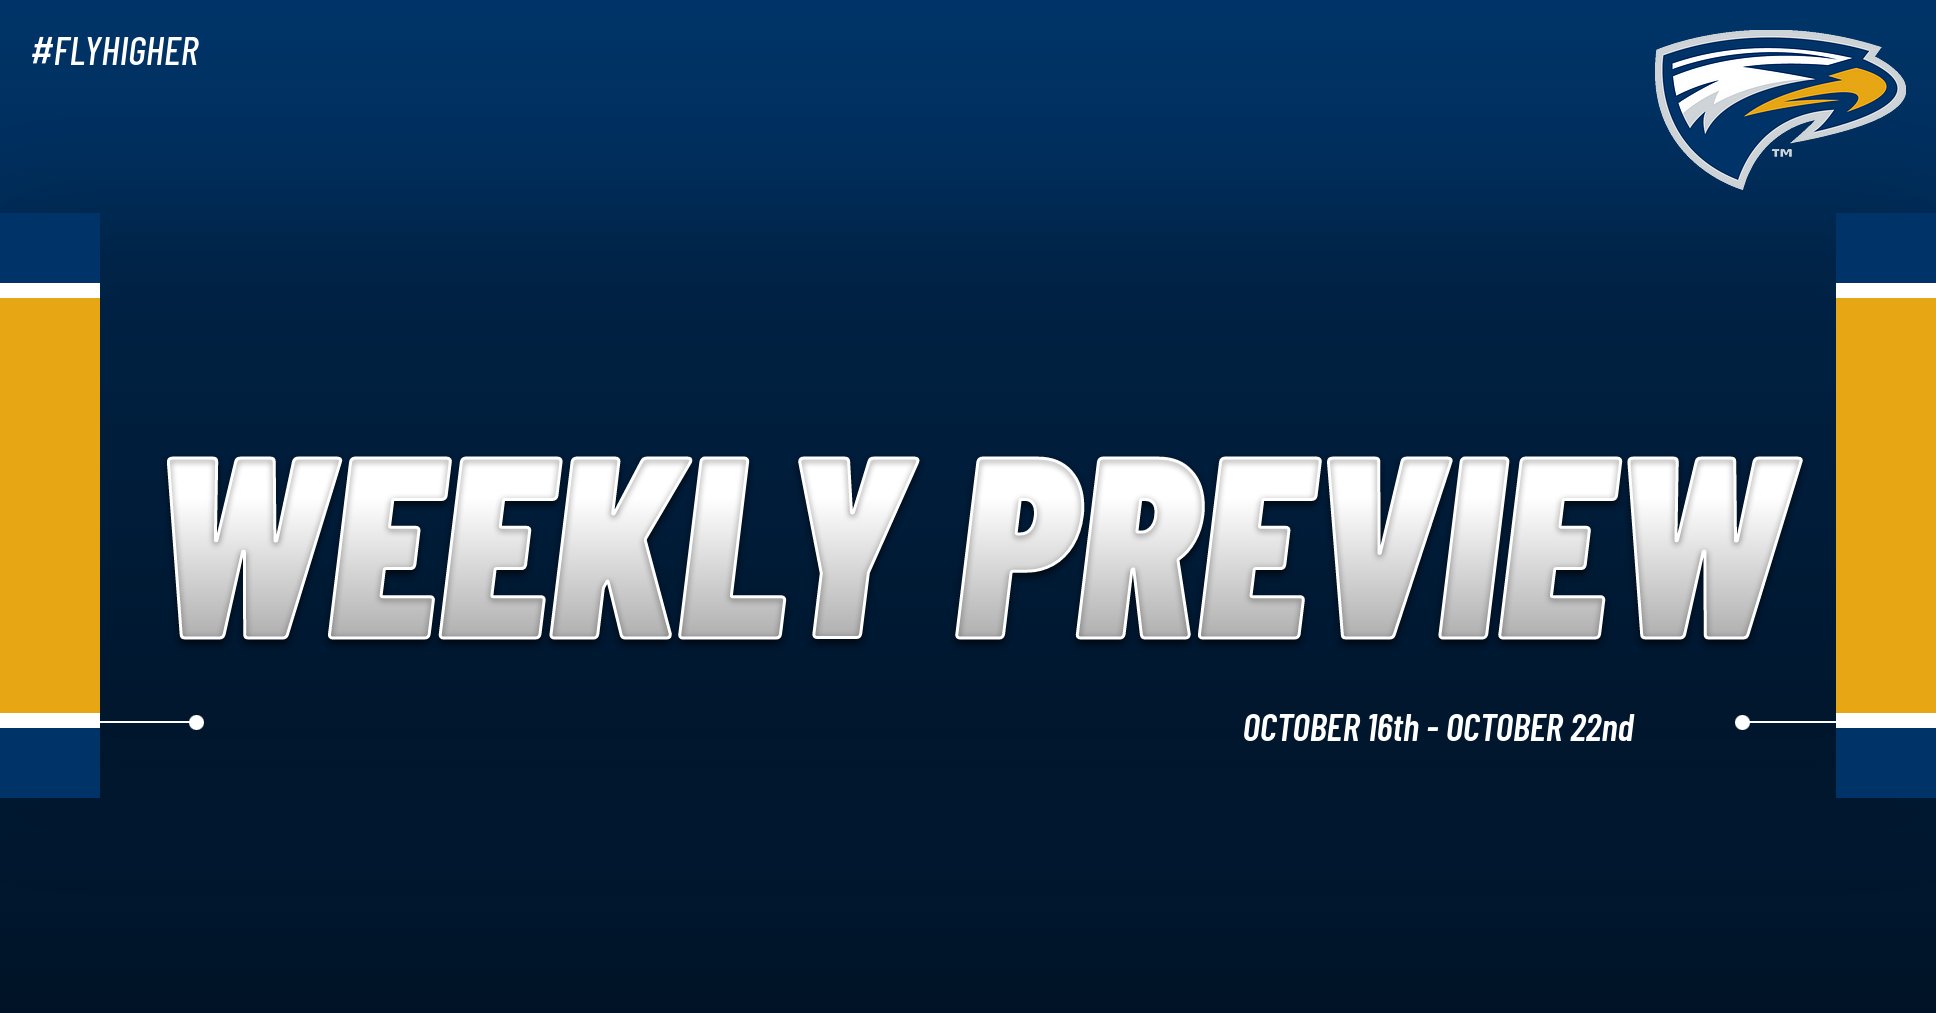 Emory Athletics Weekly Preview: October 16th - October 22nd